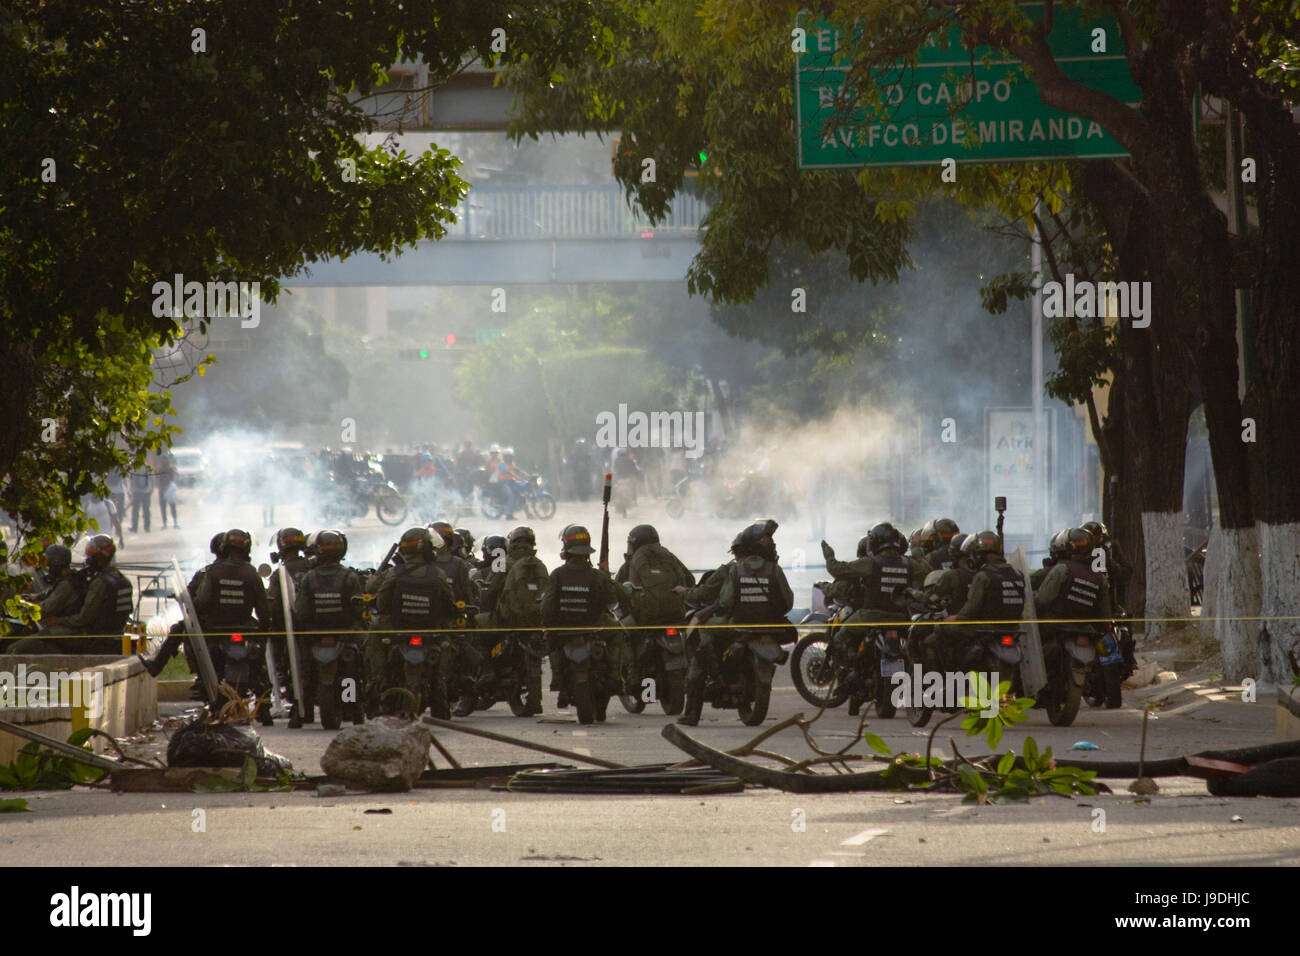 Members of the Bolivarian National Guard using motorcycles clash with opposition protesters to the government of Nicolas Maduro in Caracas. Stock Photo